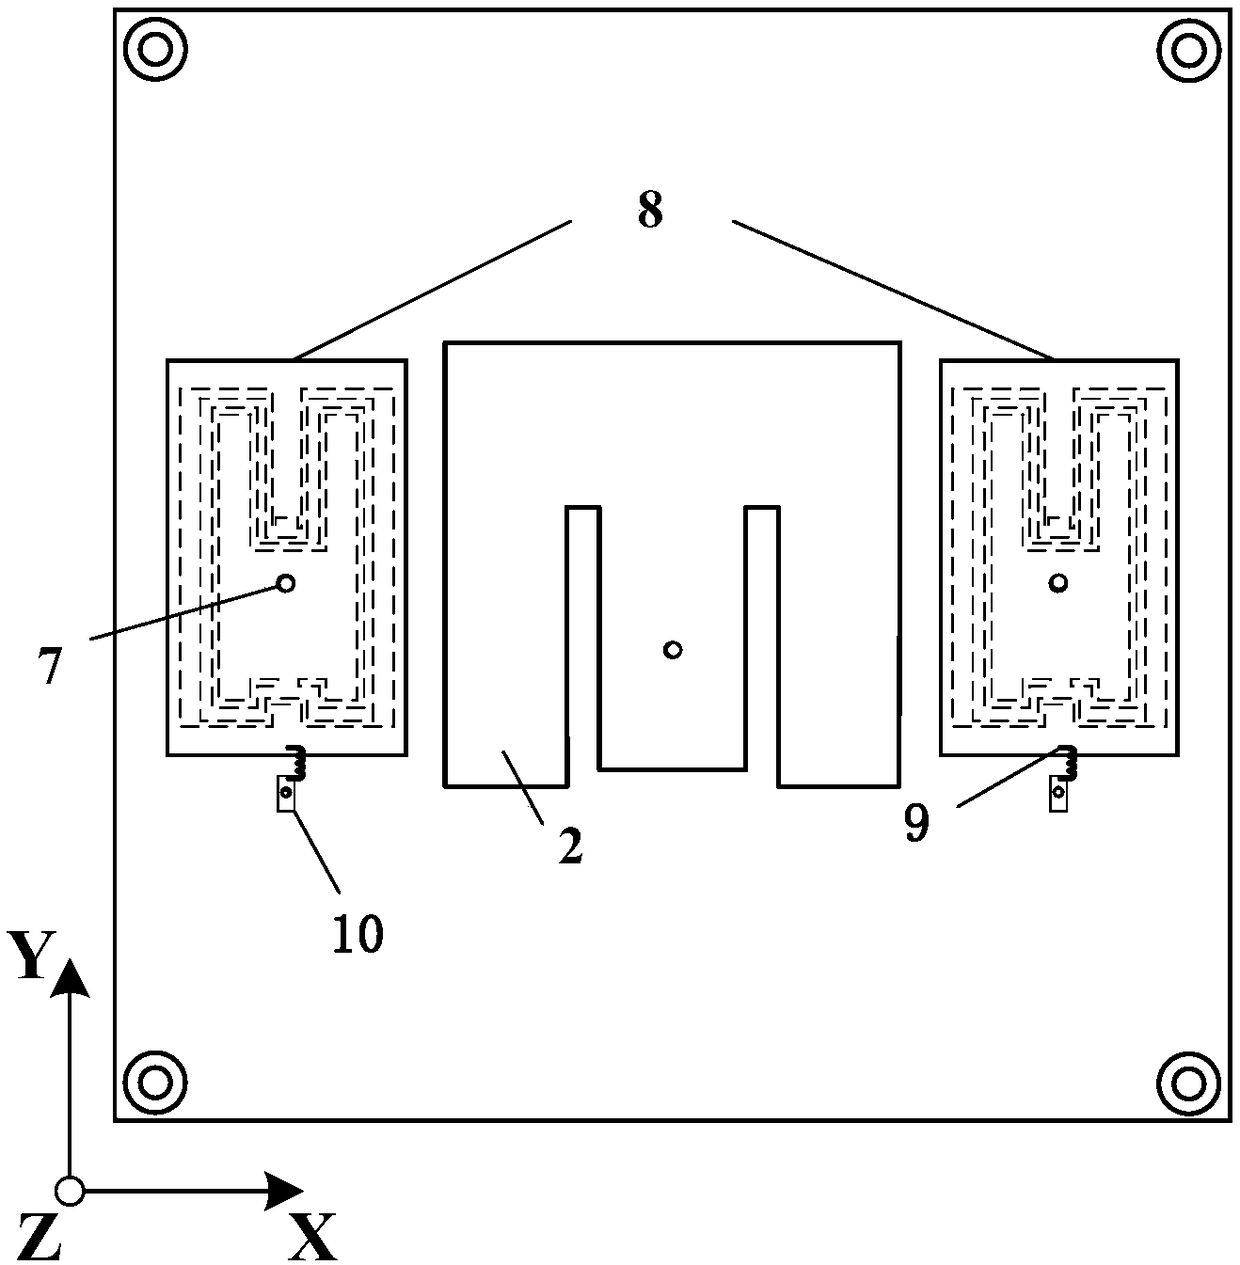 Small-size beam controllable patch antenna based on reconfigurable parasitic element